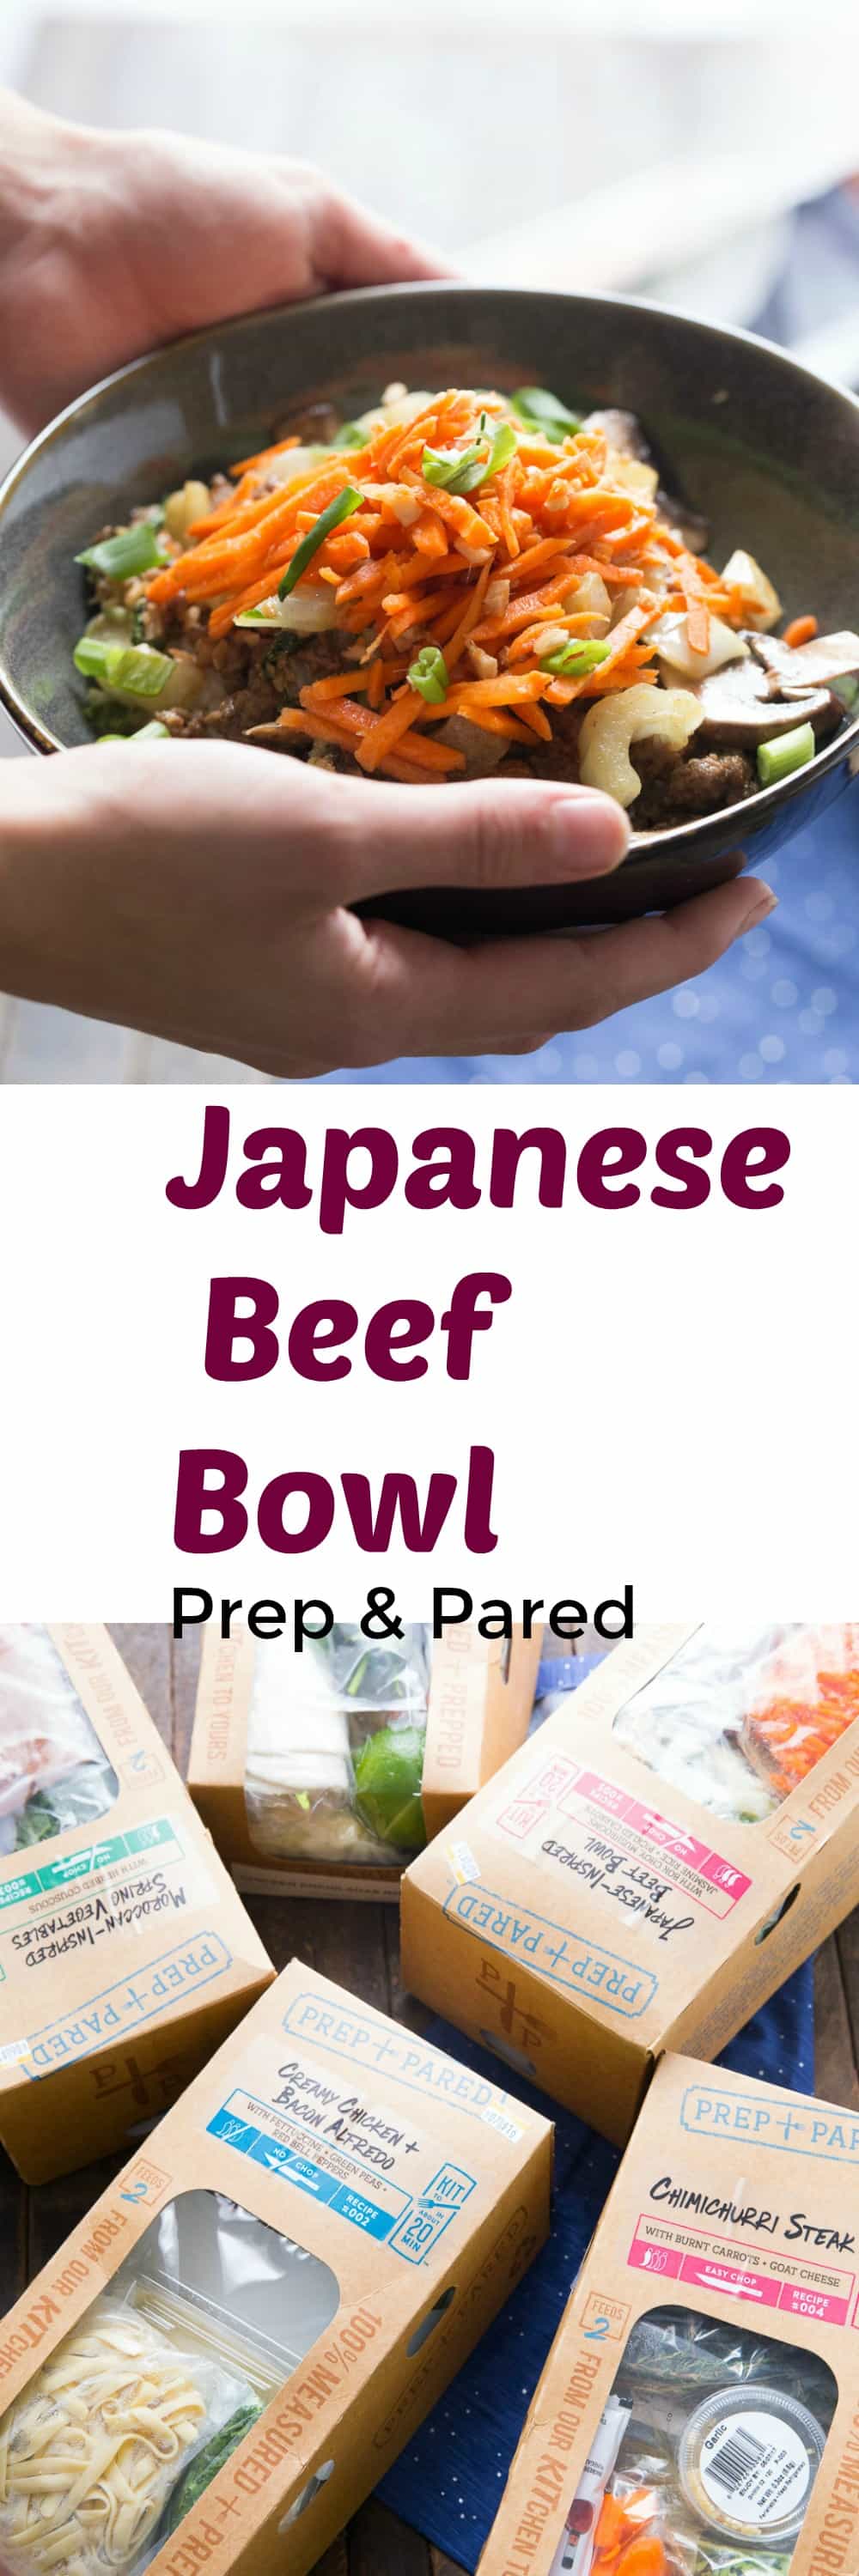 Kroger makes these Japanese Beef Bowls come together quickly!  How does dinner in 20 minutes sound?  lemonsforlulu.com